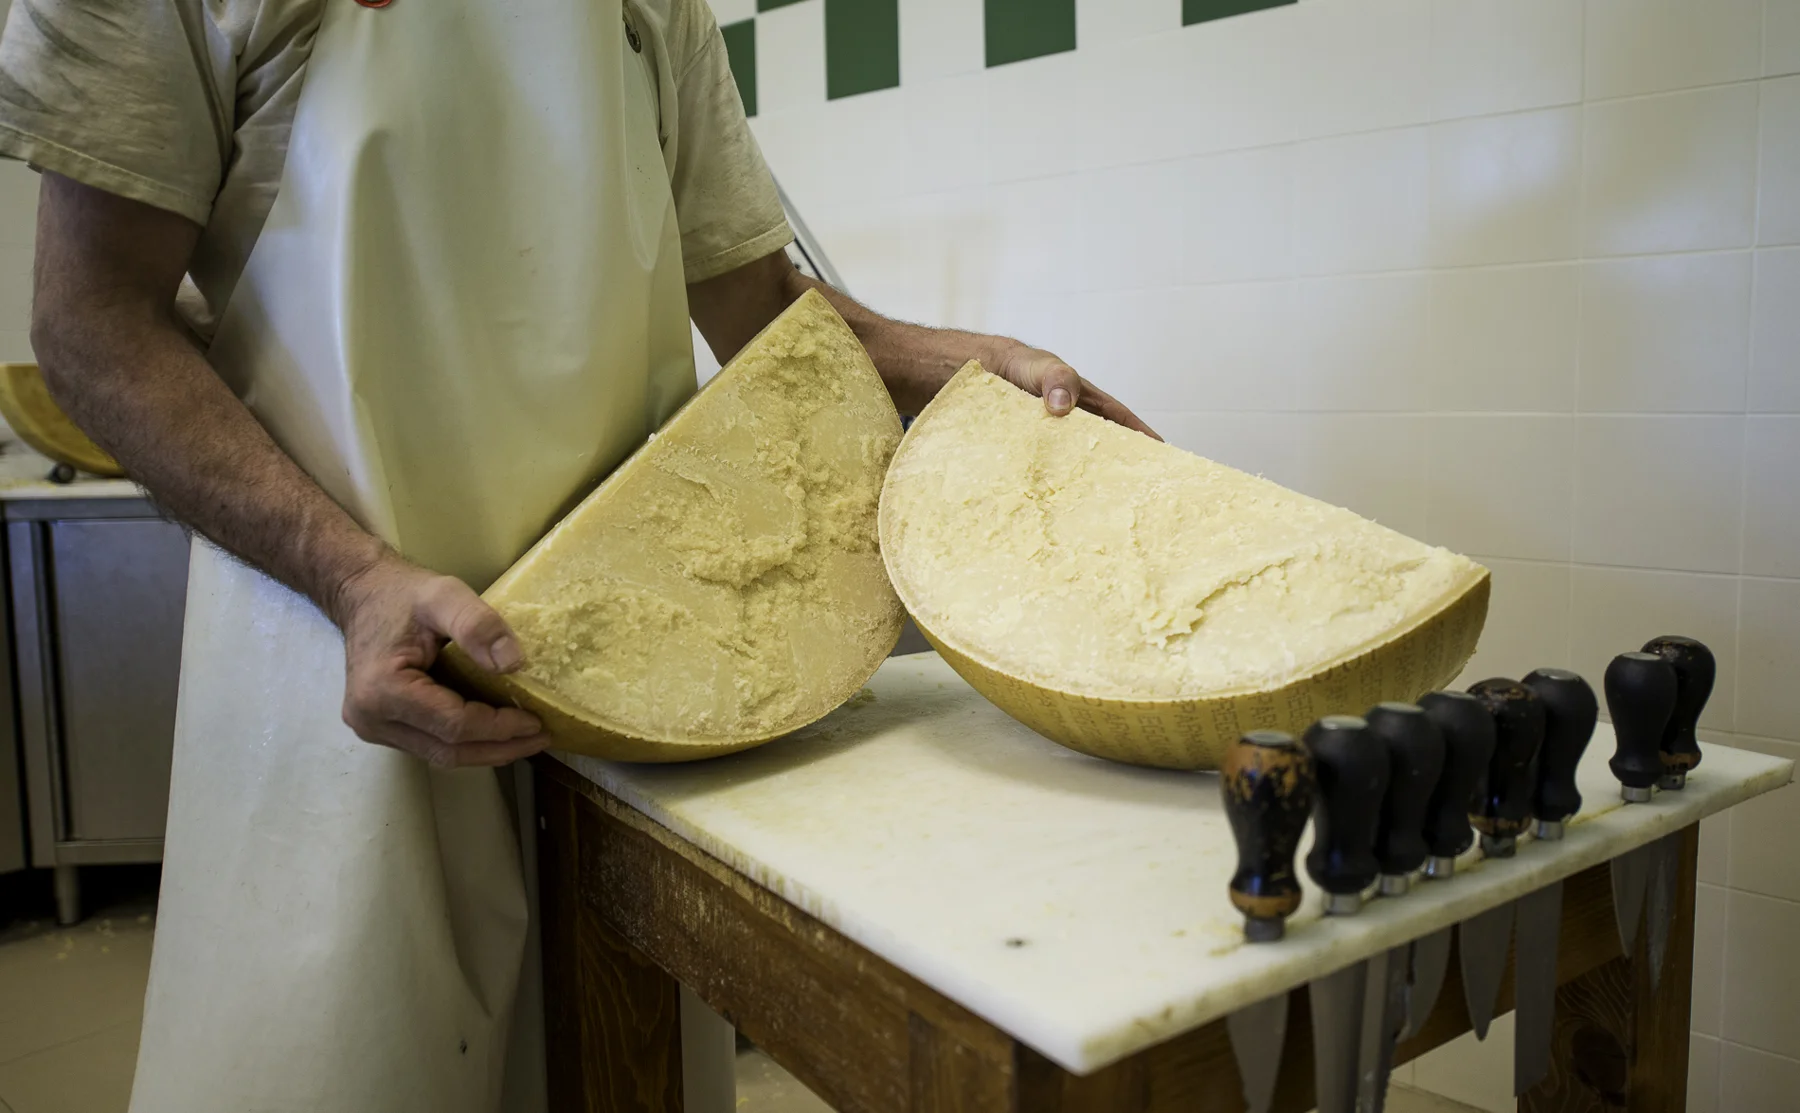 Take A Tour Of Italy’s Most Iconic Cheese Factory - 1446420